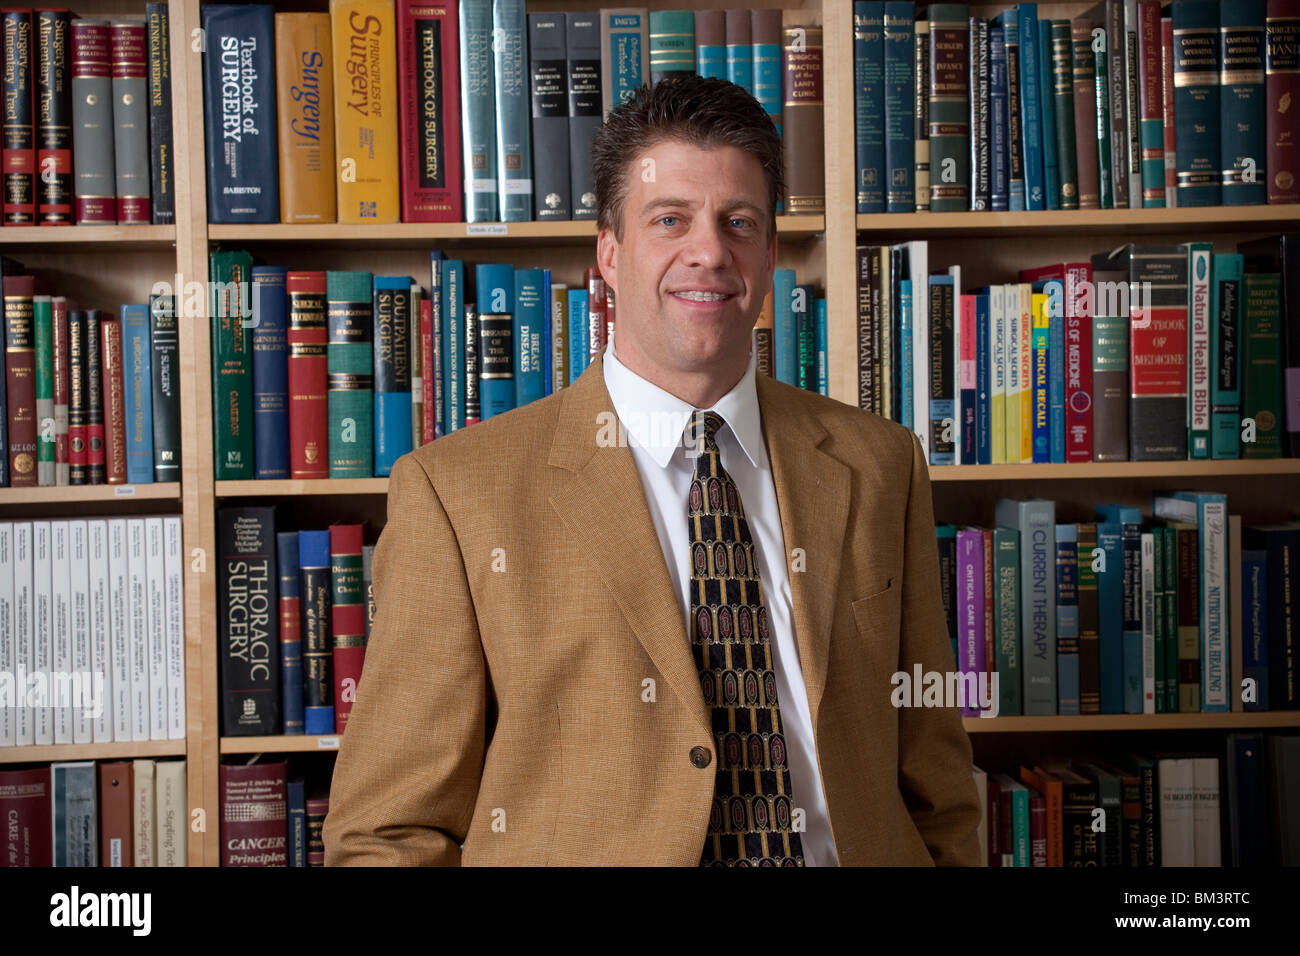 Doctor standing in front of book shelf filled with medical volumes Stock Photo